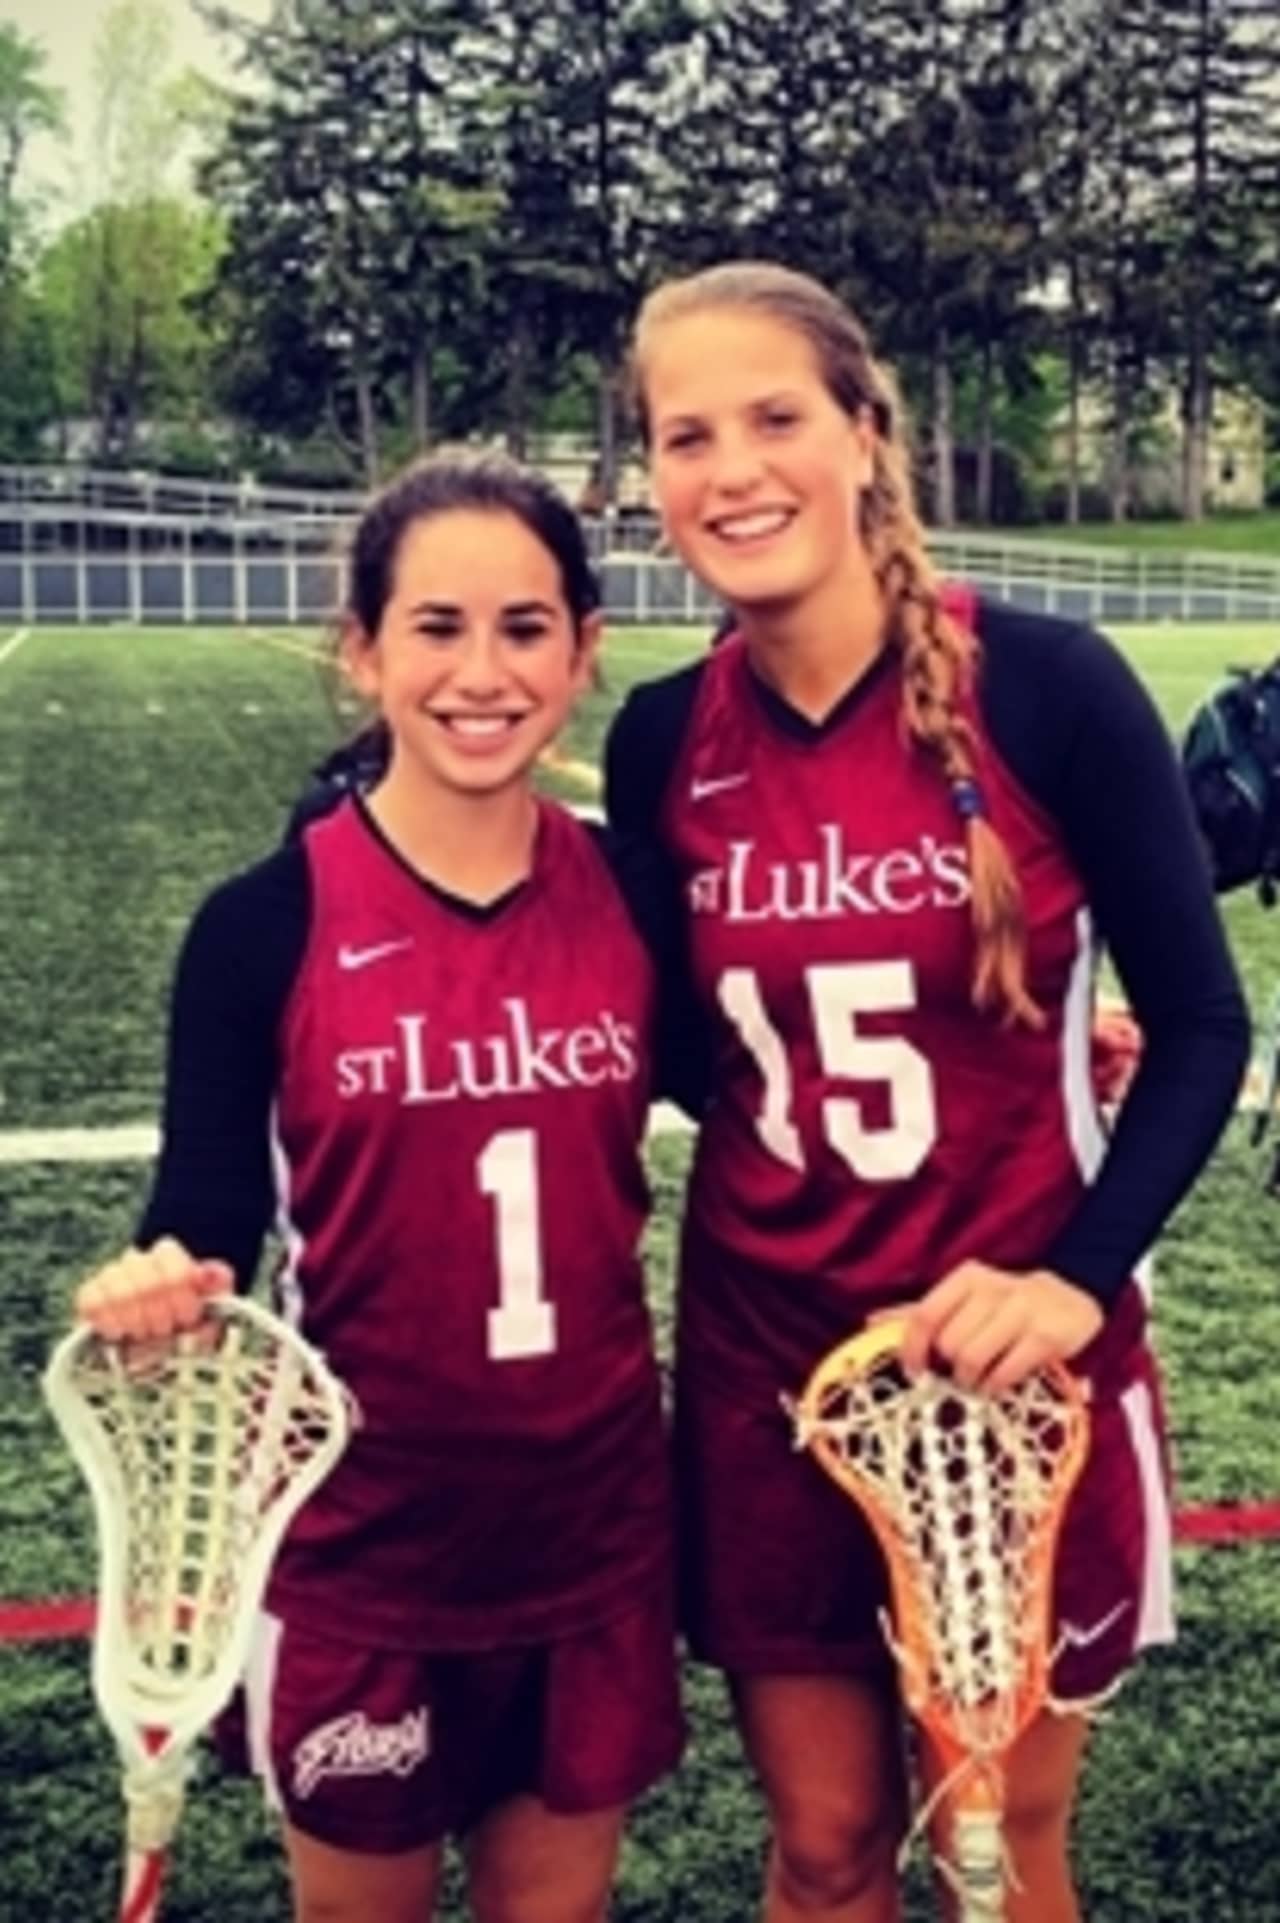 Stamford's Lindsay Bralower, left, and Weston's Caroline Parsons were named Academic All-Americans in girls lacrosse. Both players are recent graduates of St. Luke's.